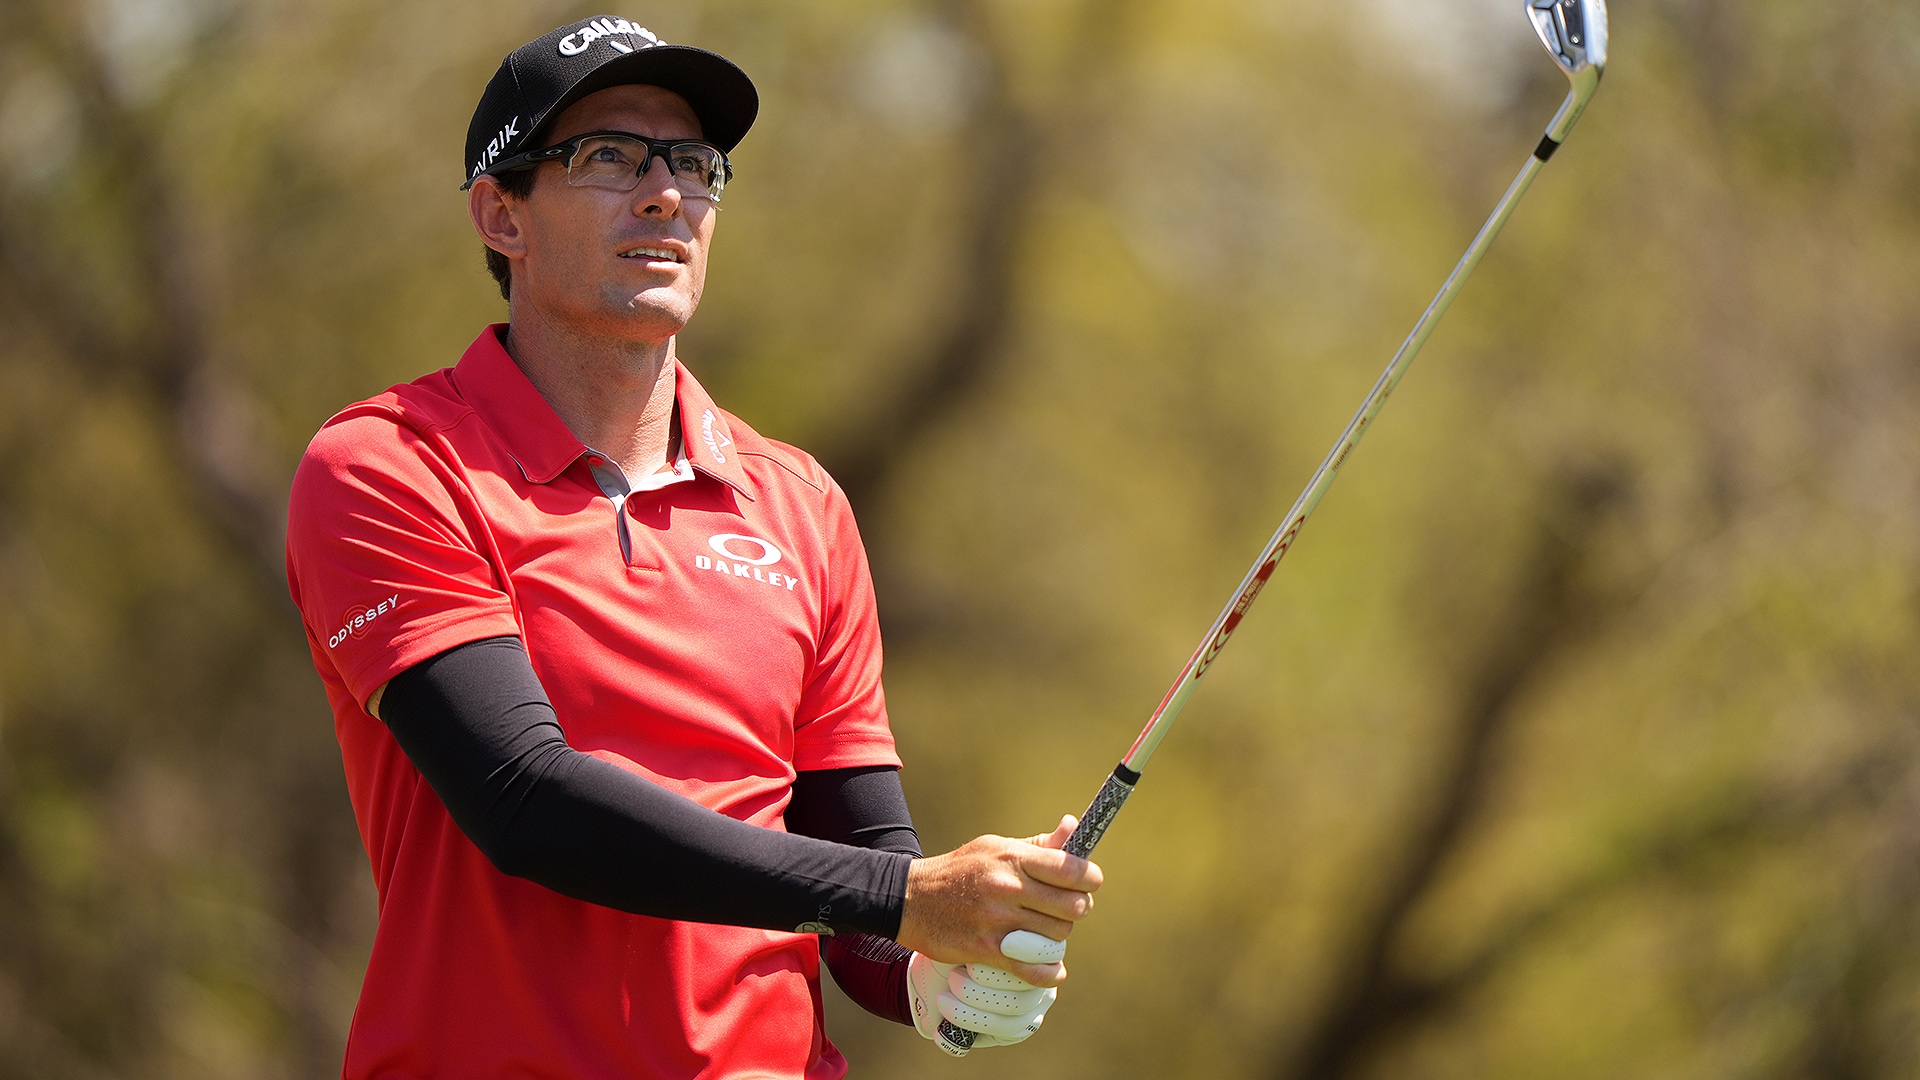 Despite Friday loss, confident Dylan Frittelli advances to weekend at WGC-Match Play